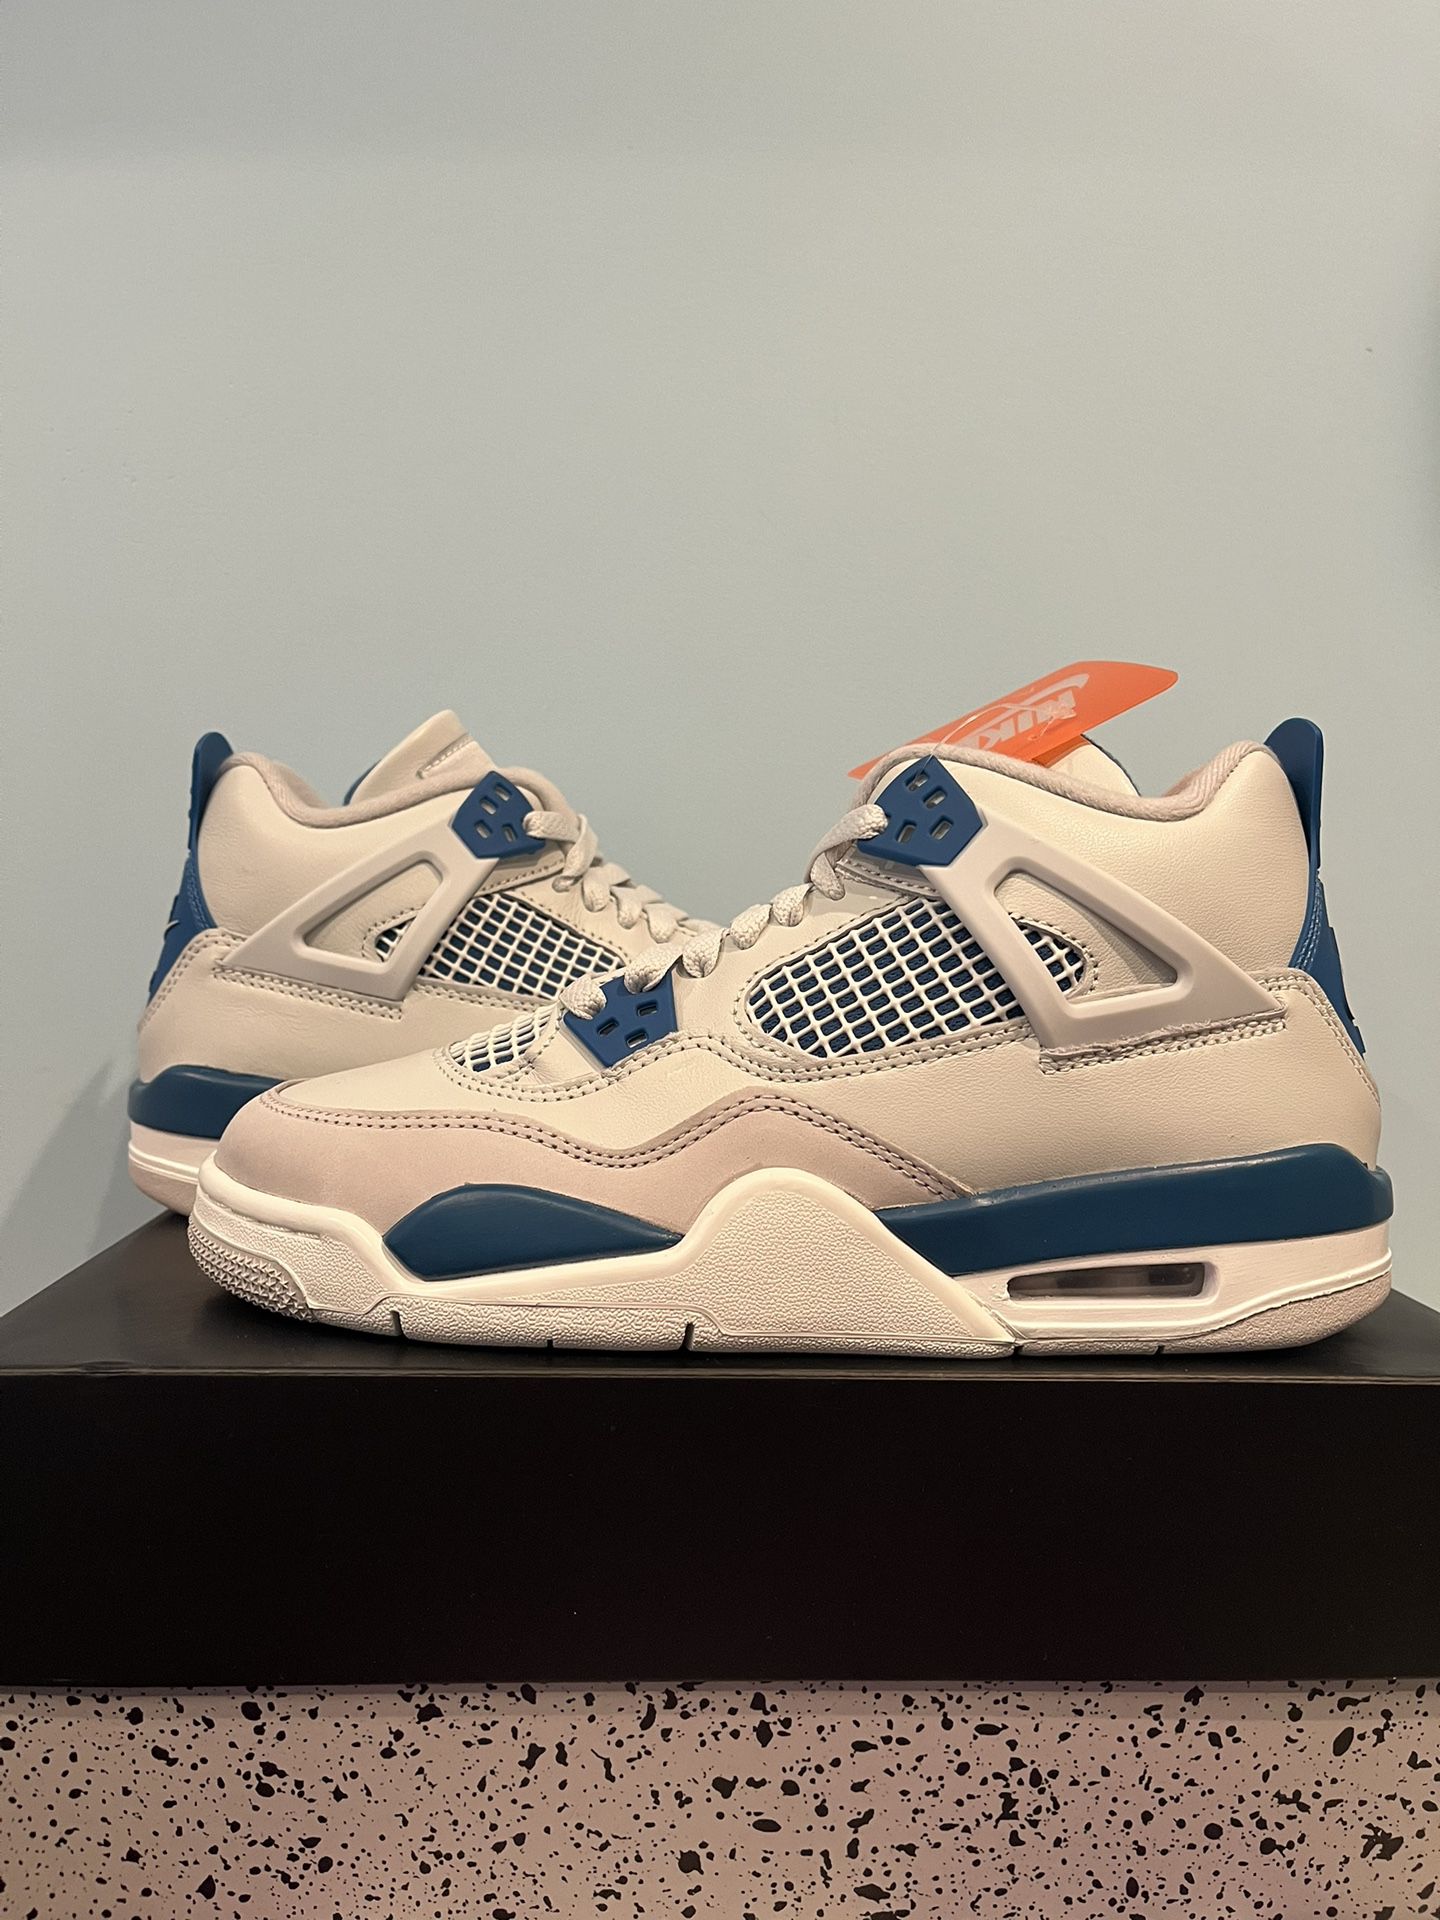 Jordan 4 Military Blue Sizes 6.5Y And 7Y Available Brand New